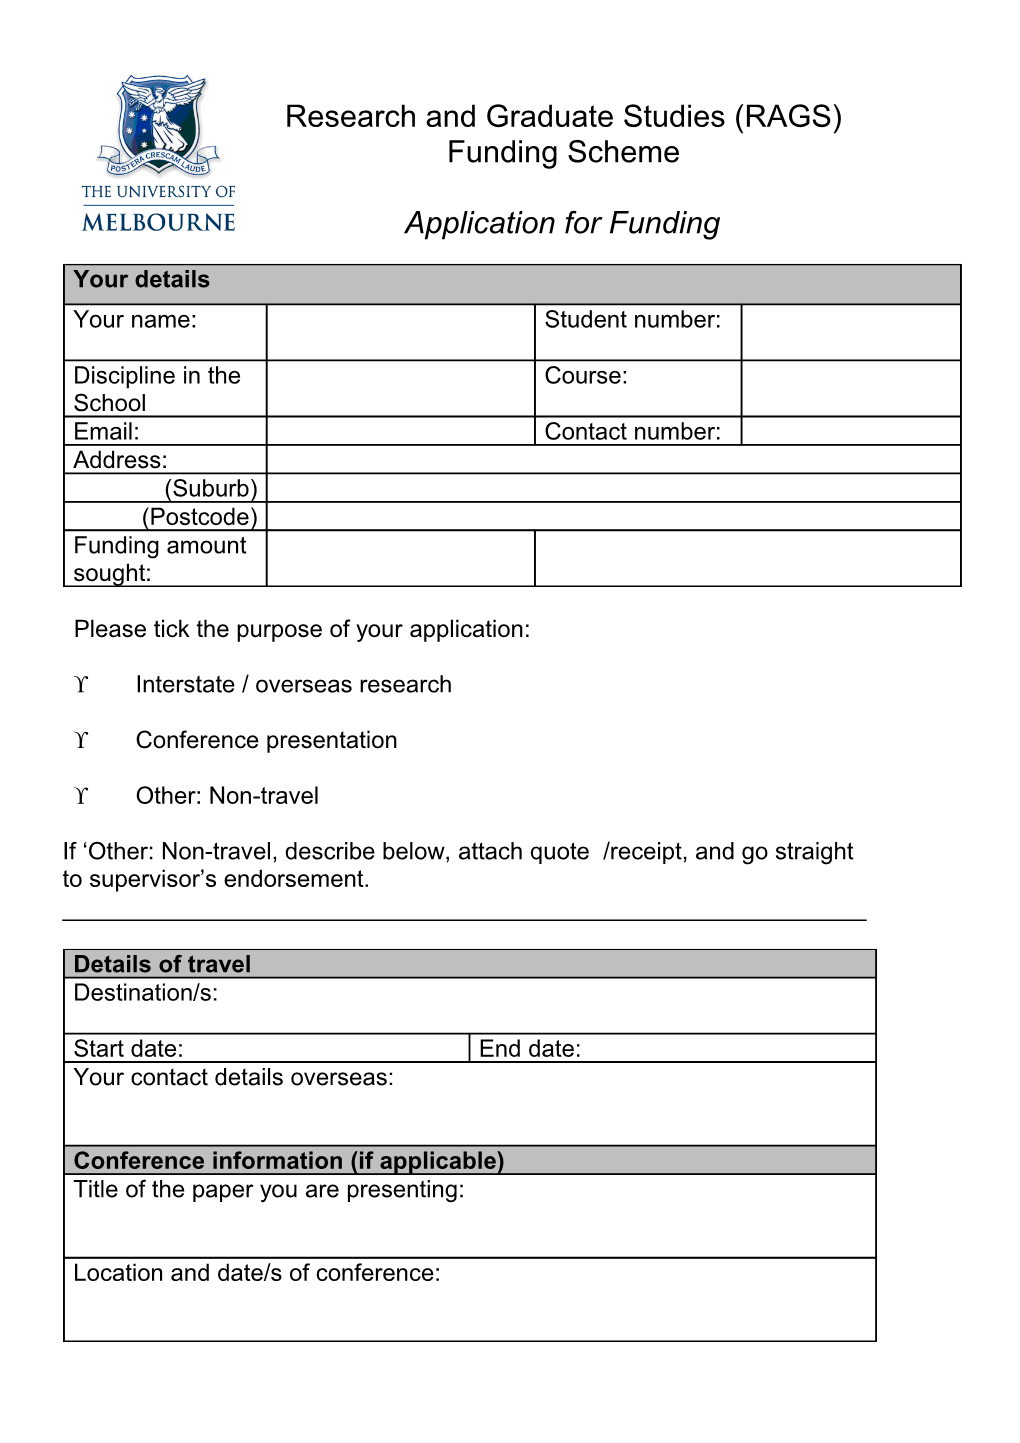 Please Tick the Purpose of Your Application